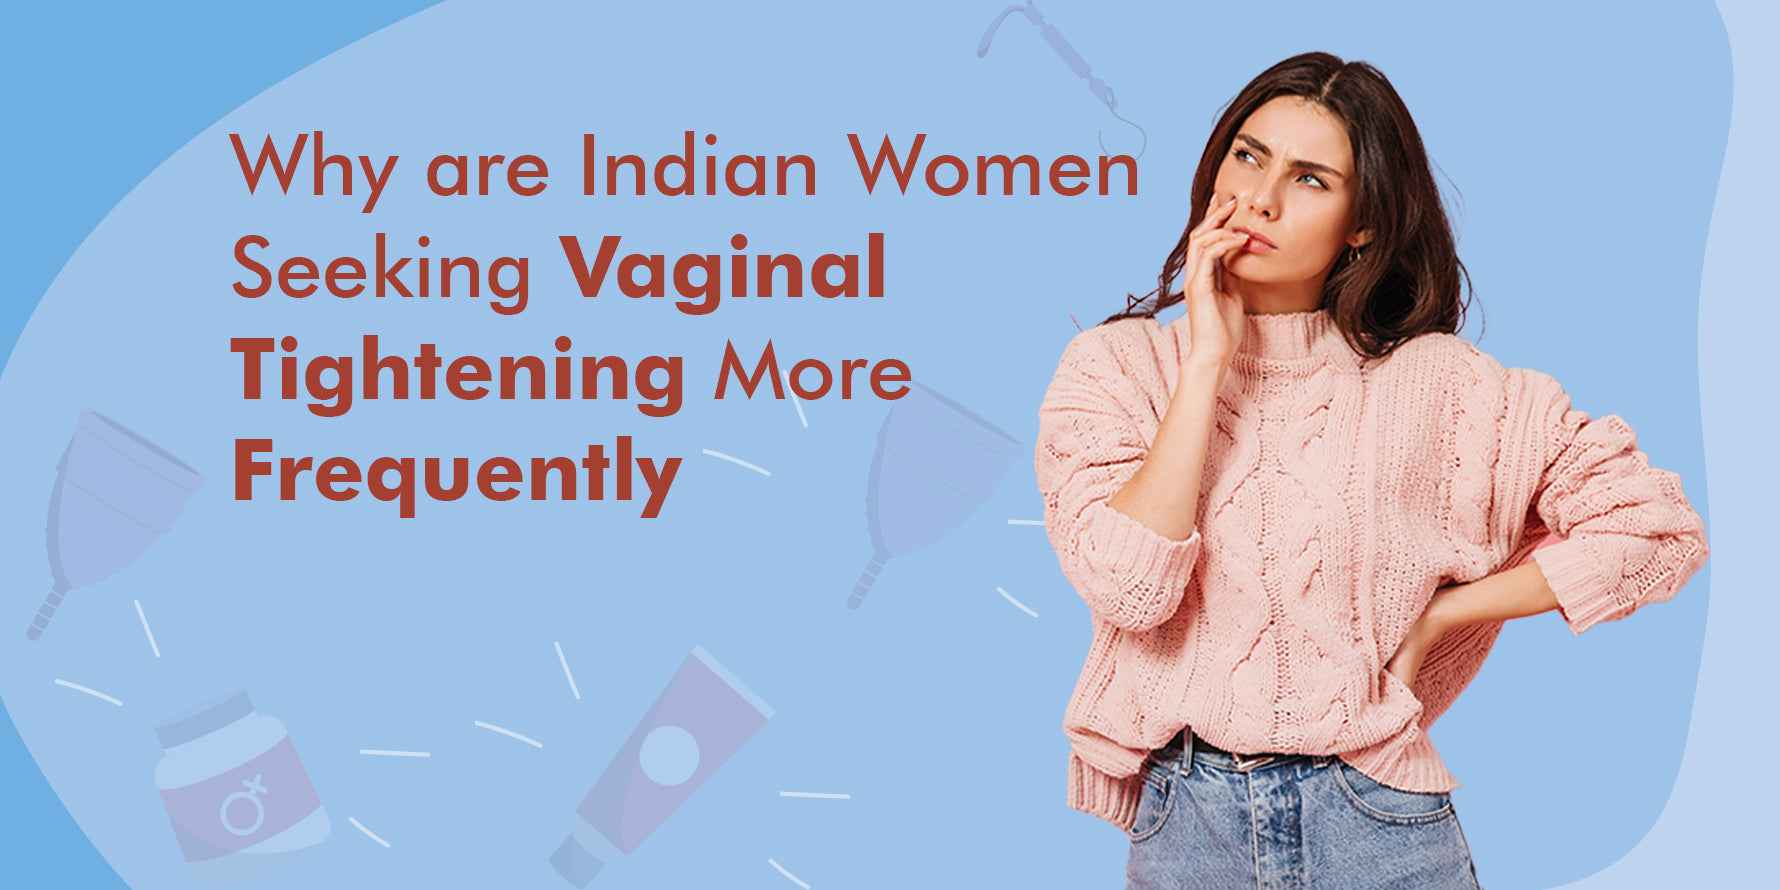 Why are Indian Women Seeking Vaginal Tightening more Frequently?